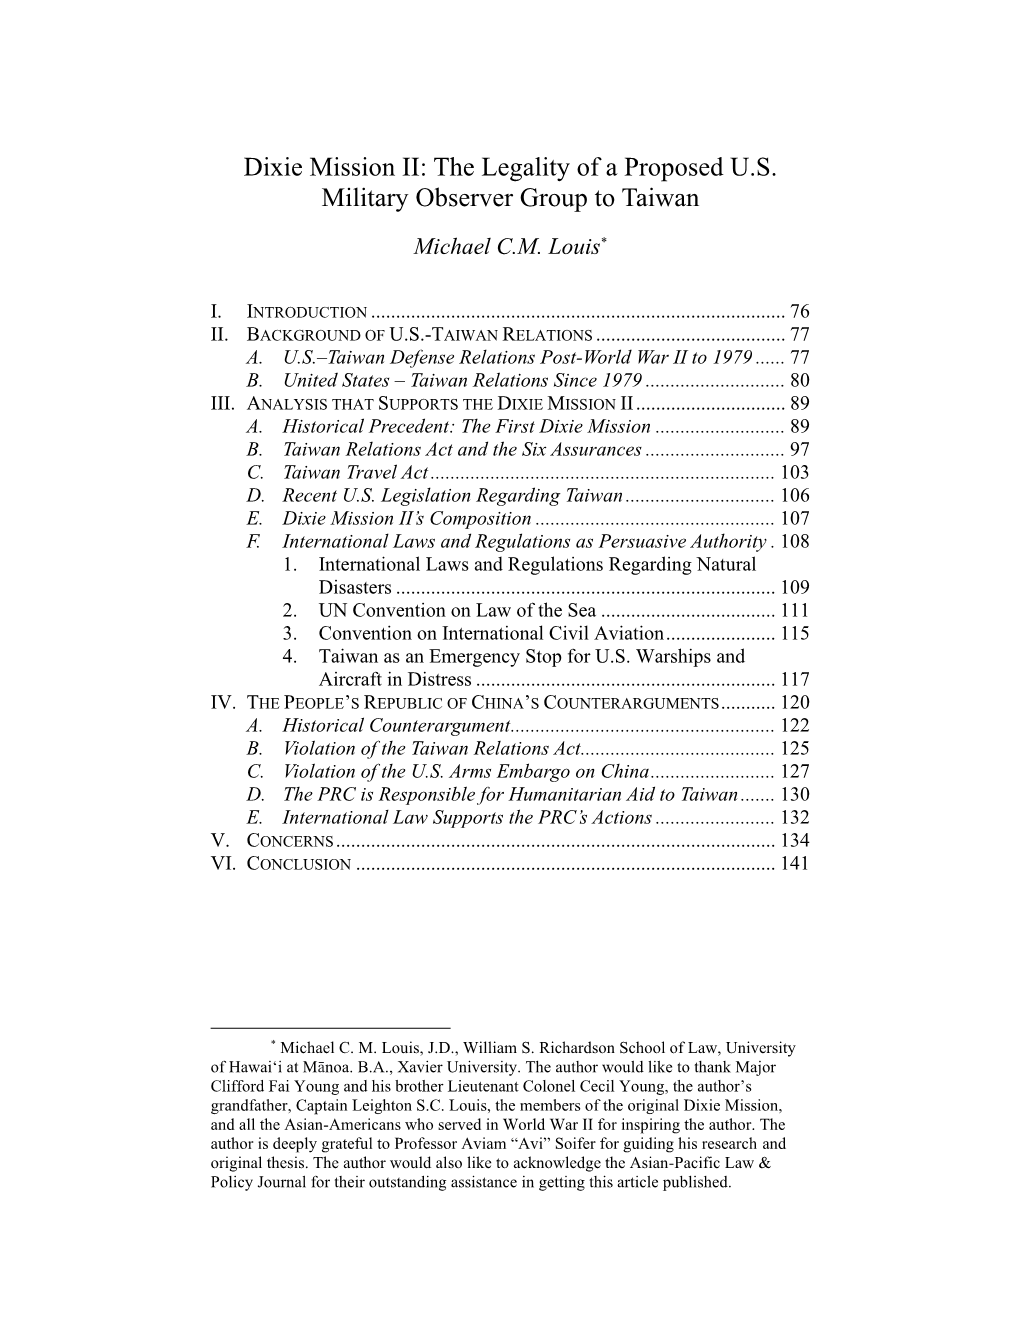 Dixie Mission II: the Legality of a Proposed U.S. Military Observer Group to Taiwan